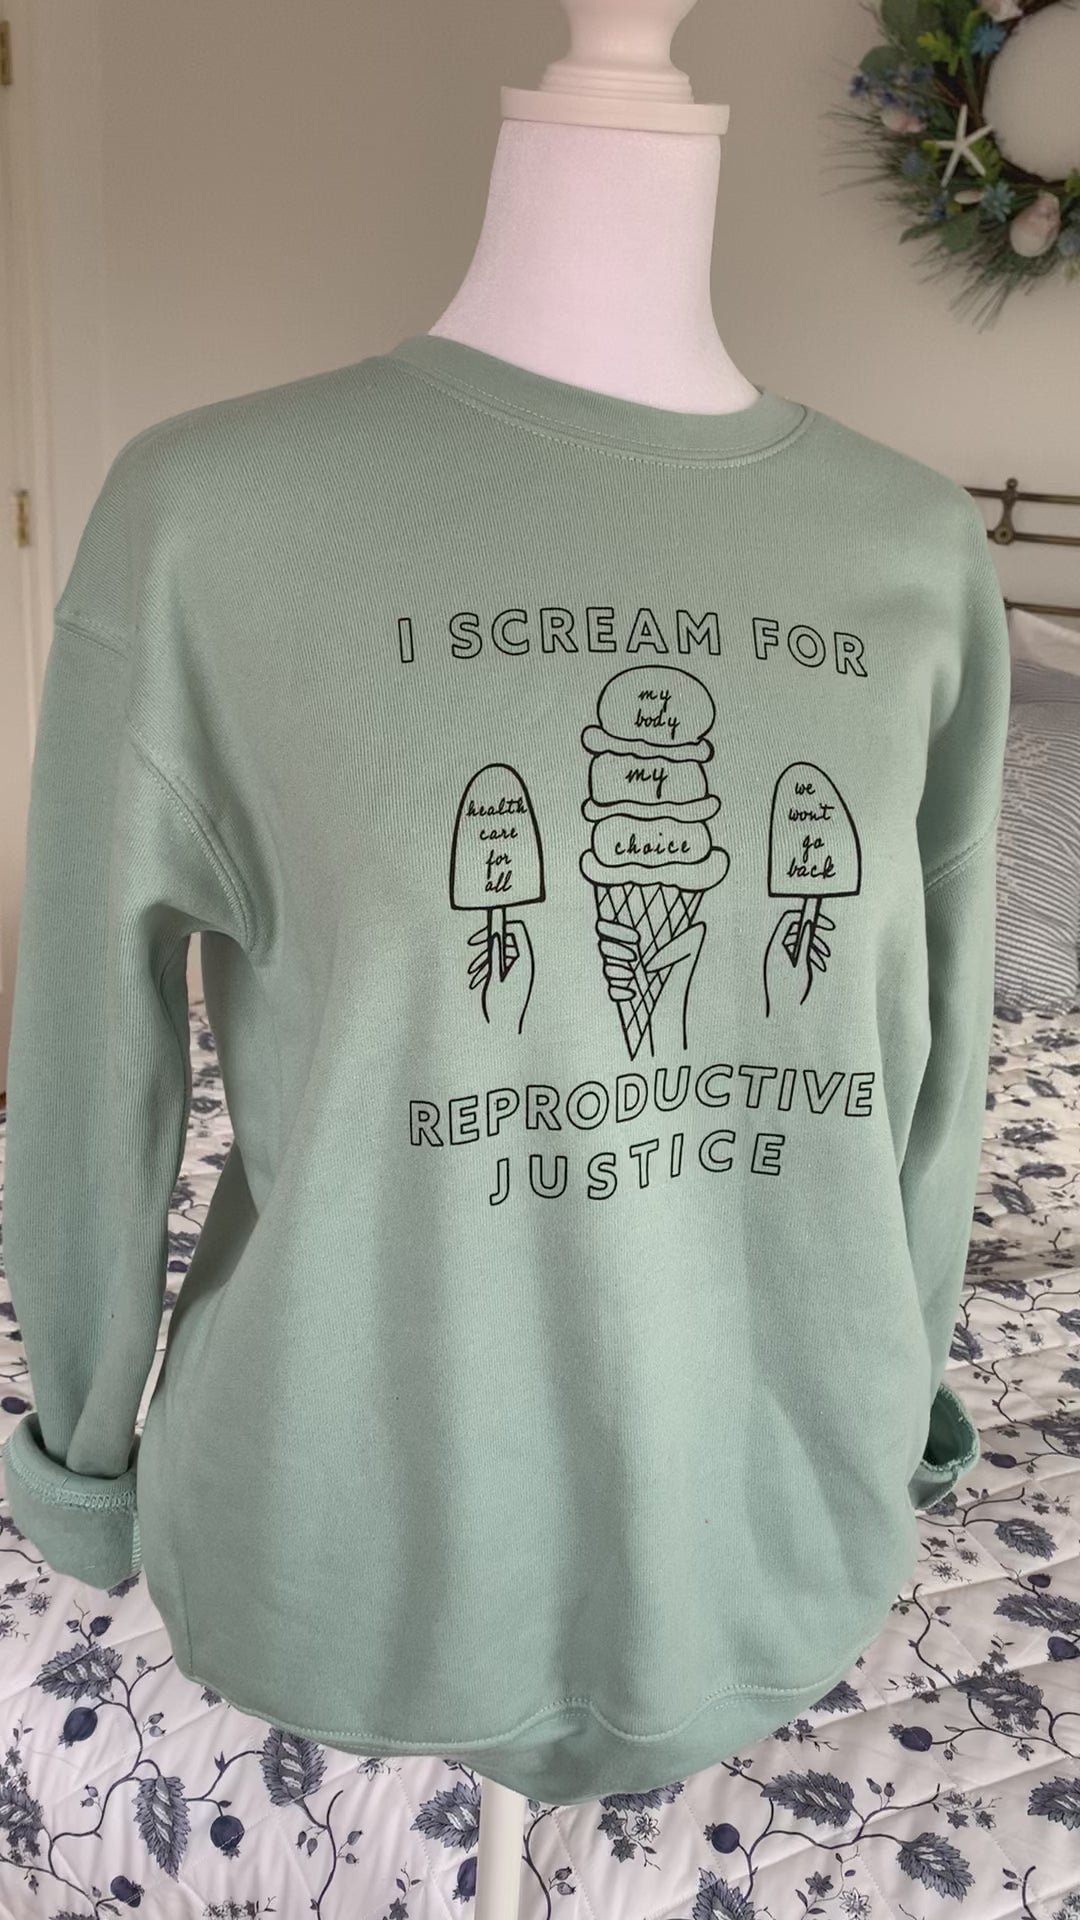 A dusty blue crewneck sweatshirt that reads "I scream for reproductive justice" hangs on a manikin